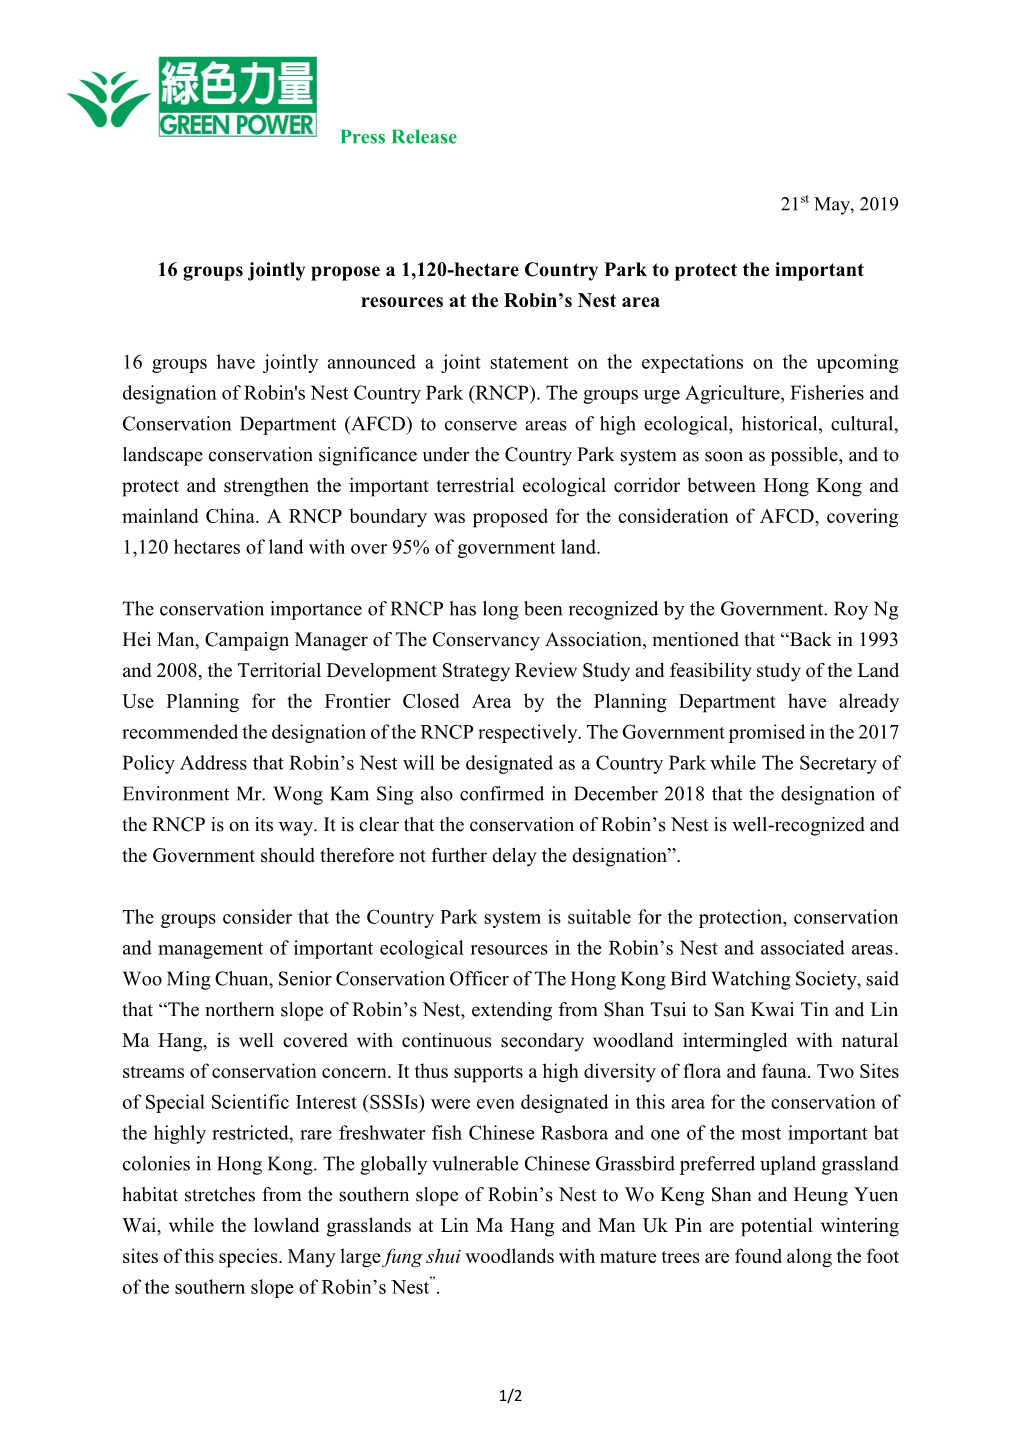 (Joint Press Release) 16 Groups Jointly Propose a 1120-Hectare